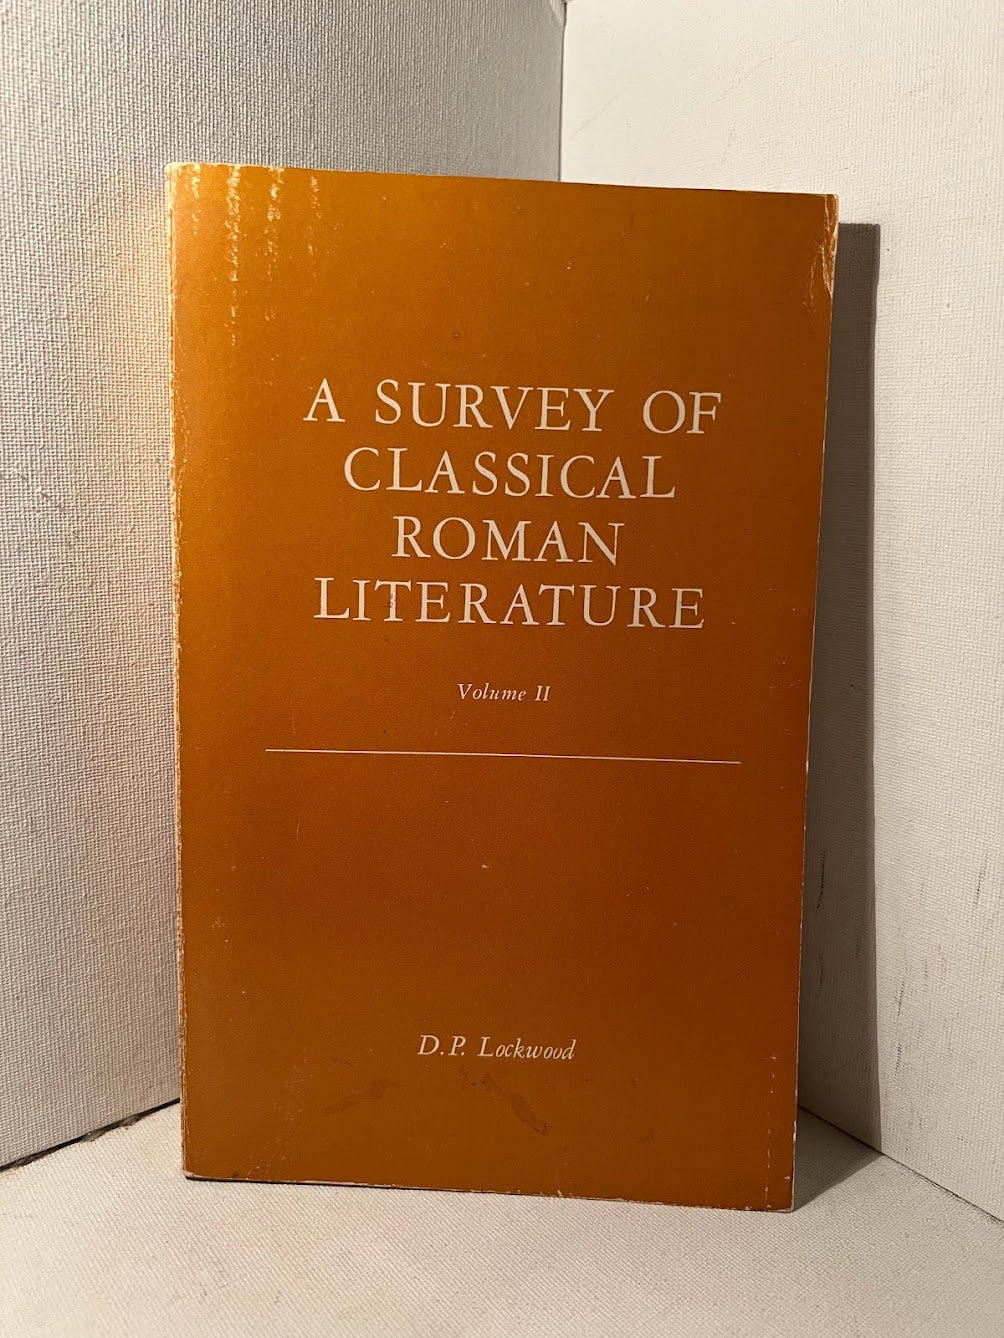 A Survey of Classical Roman Literature by D.P. Lockwood